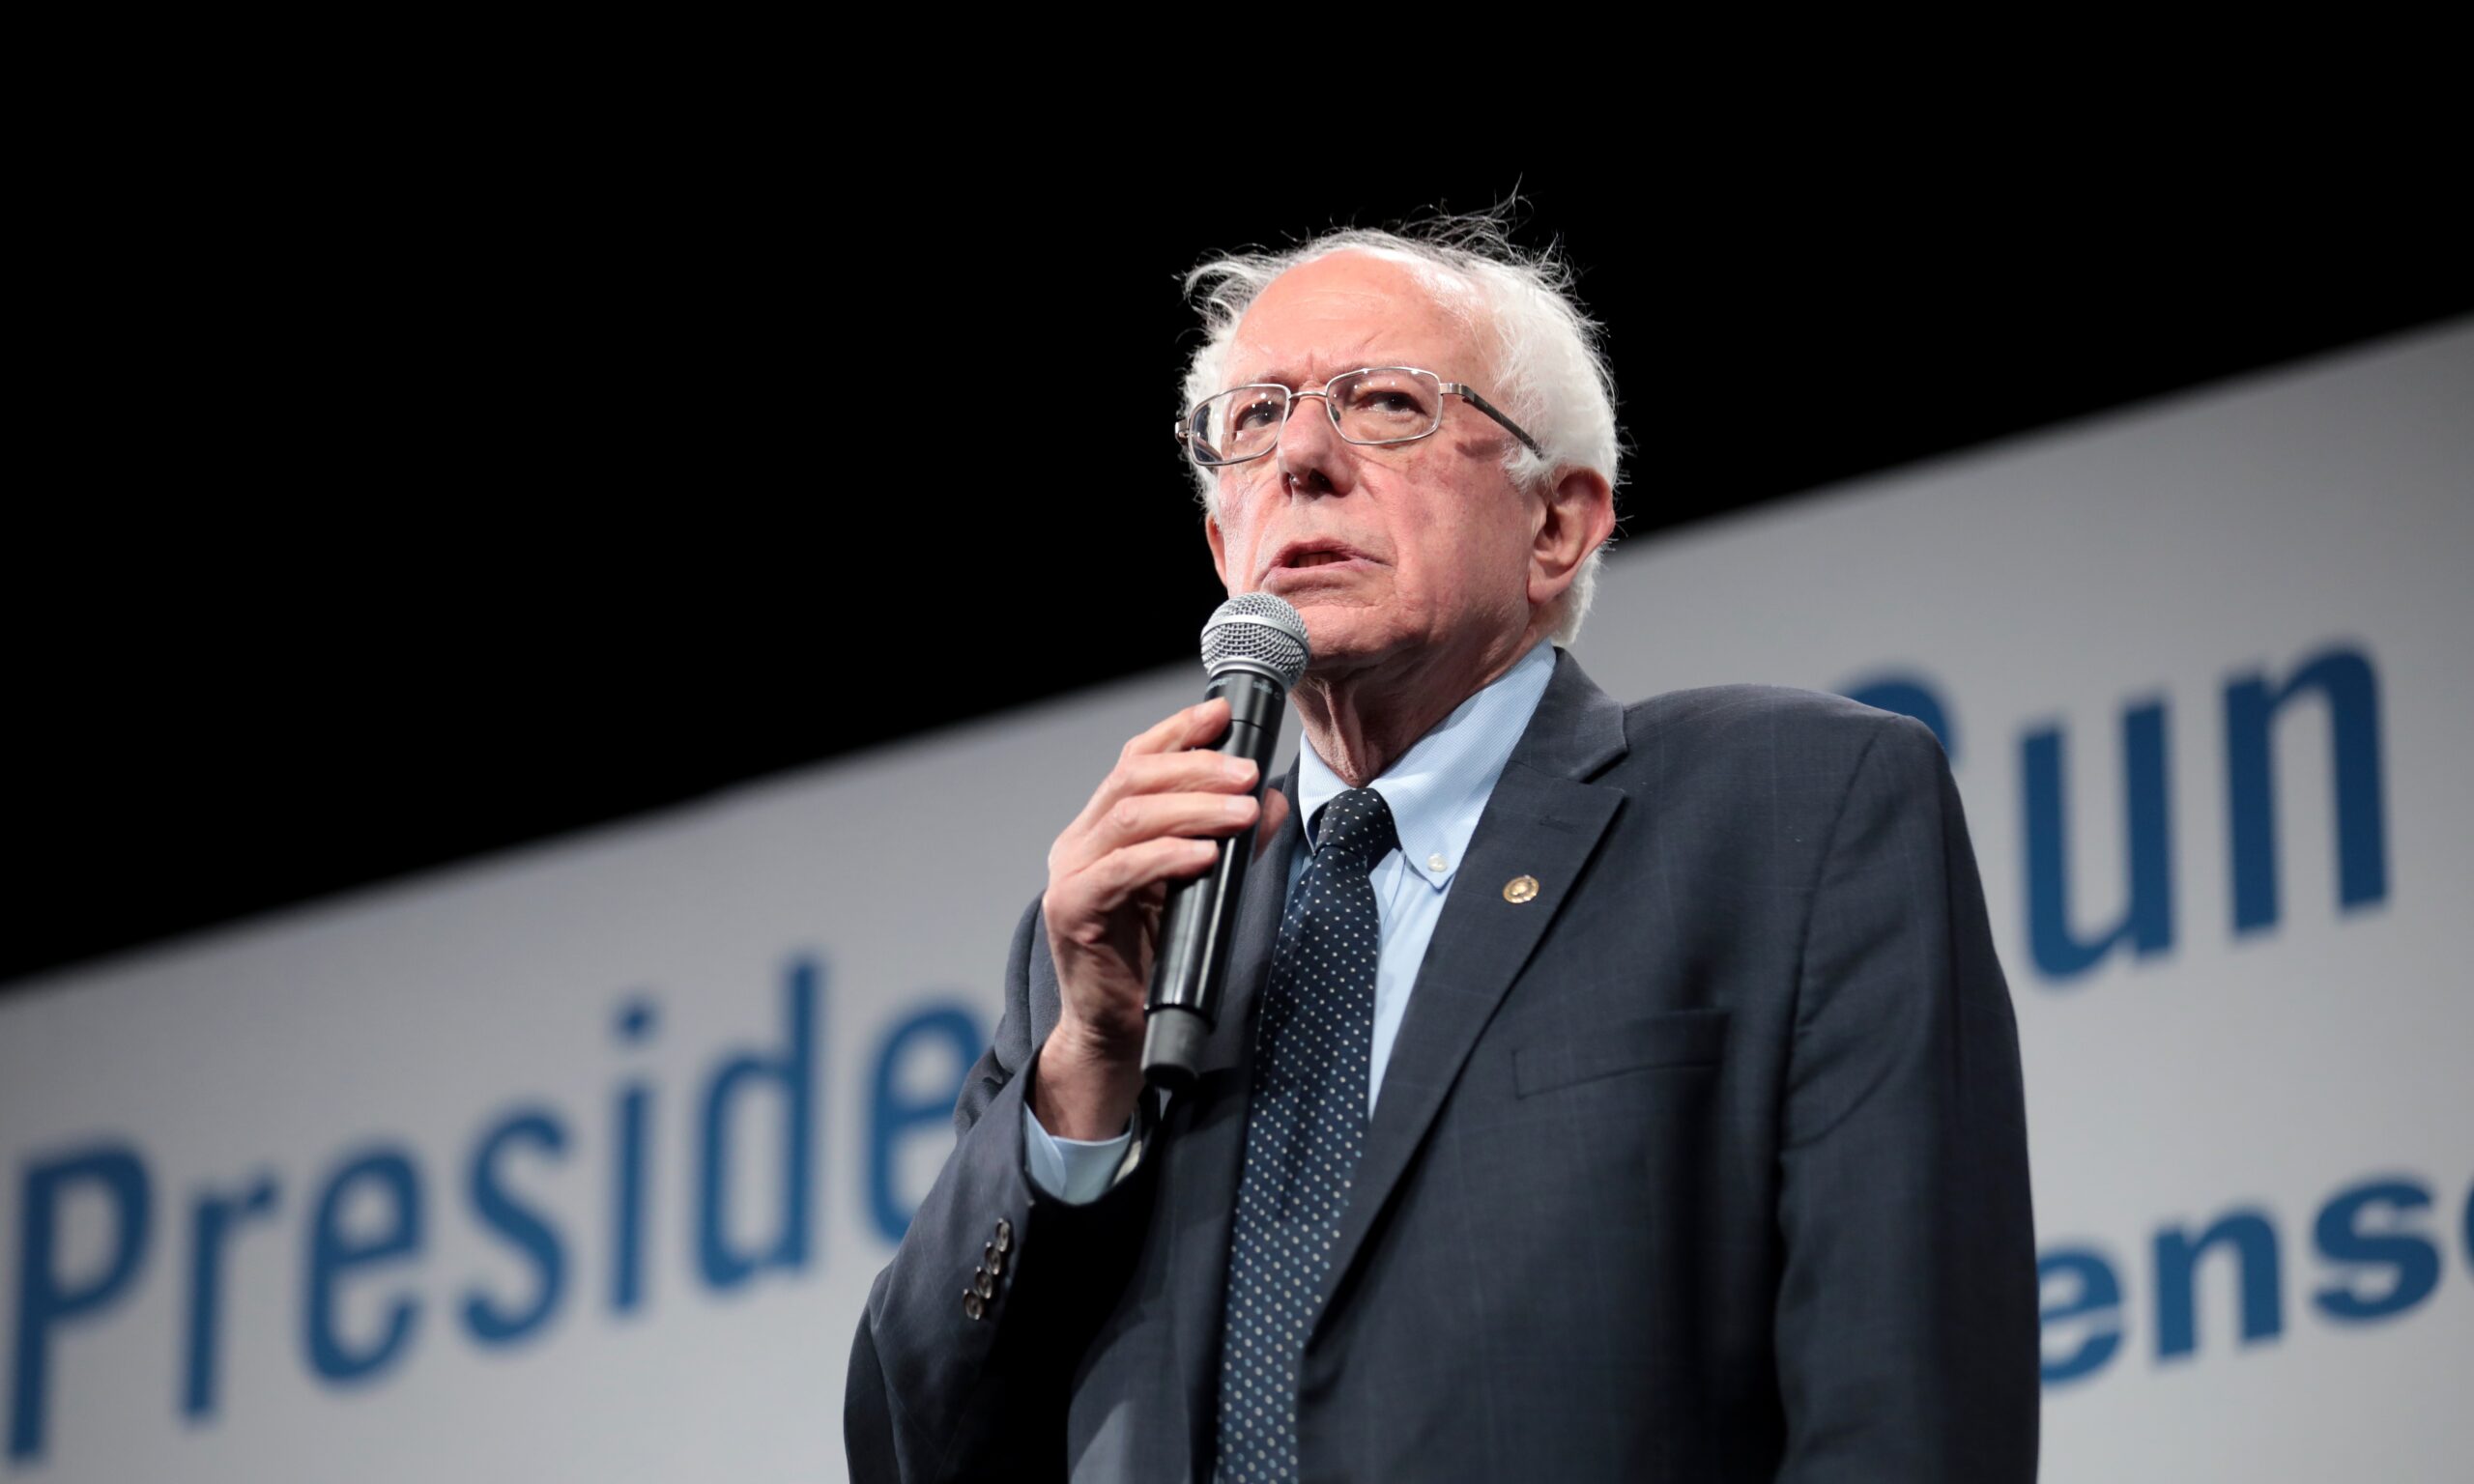 Bernie Sanders is pictured holding a microphone, wearing a dark suit and tie - making a speech in front of a dark background.